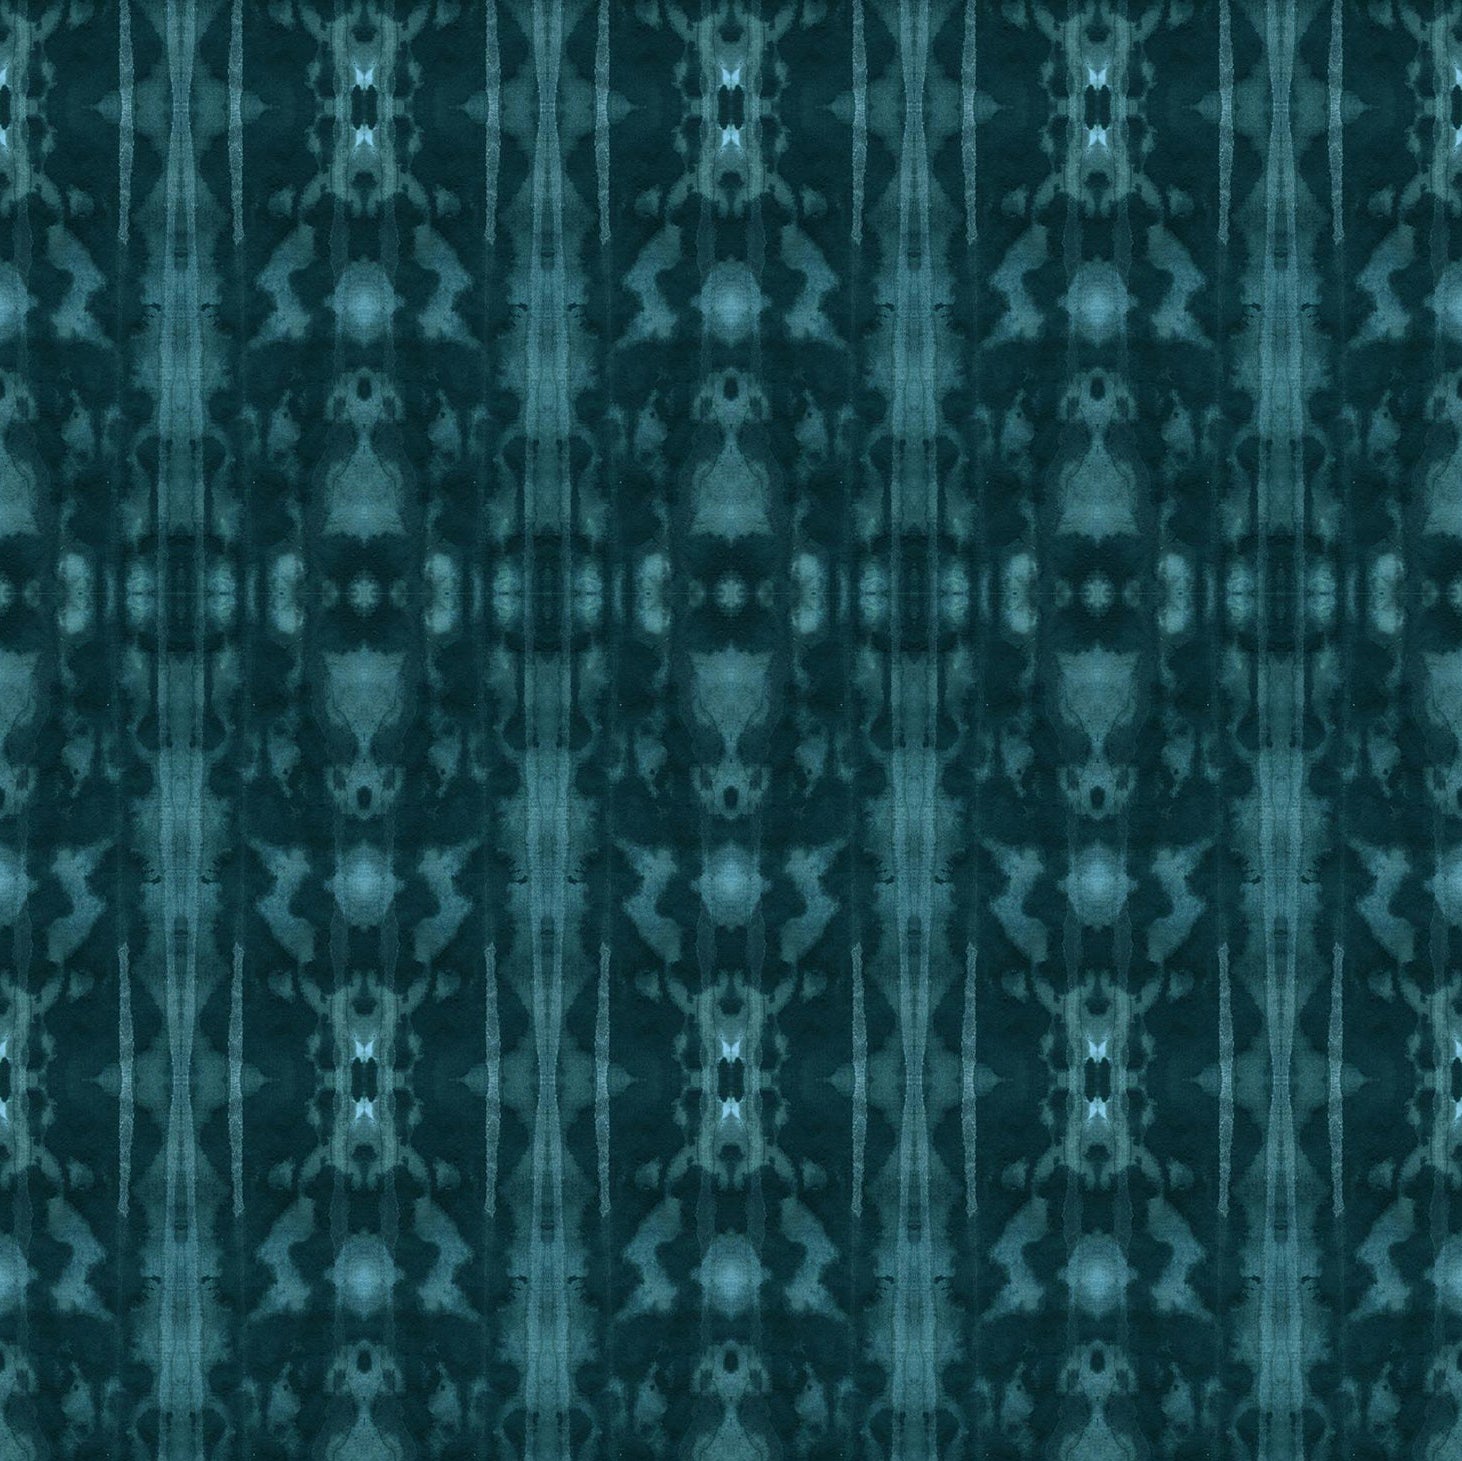 Detail of wallpaper in a painterly ikat print in turquoise and navy.